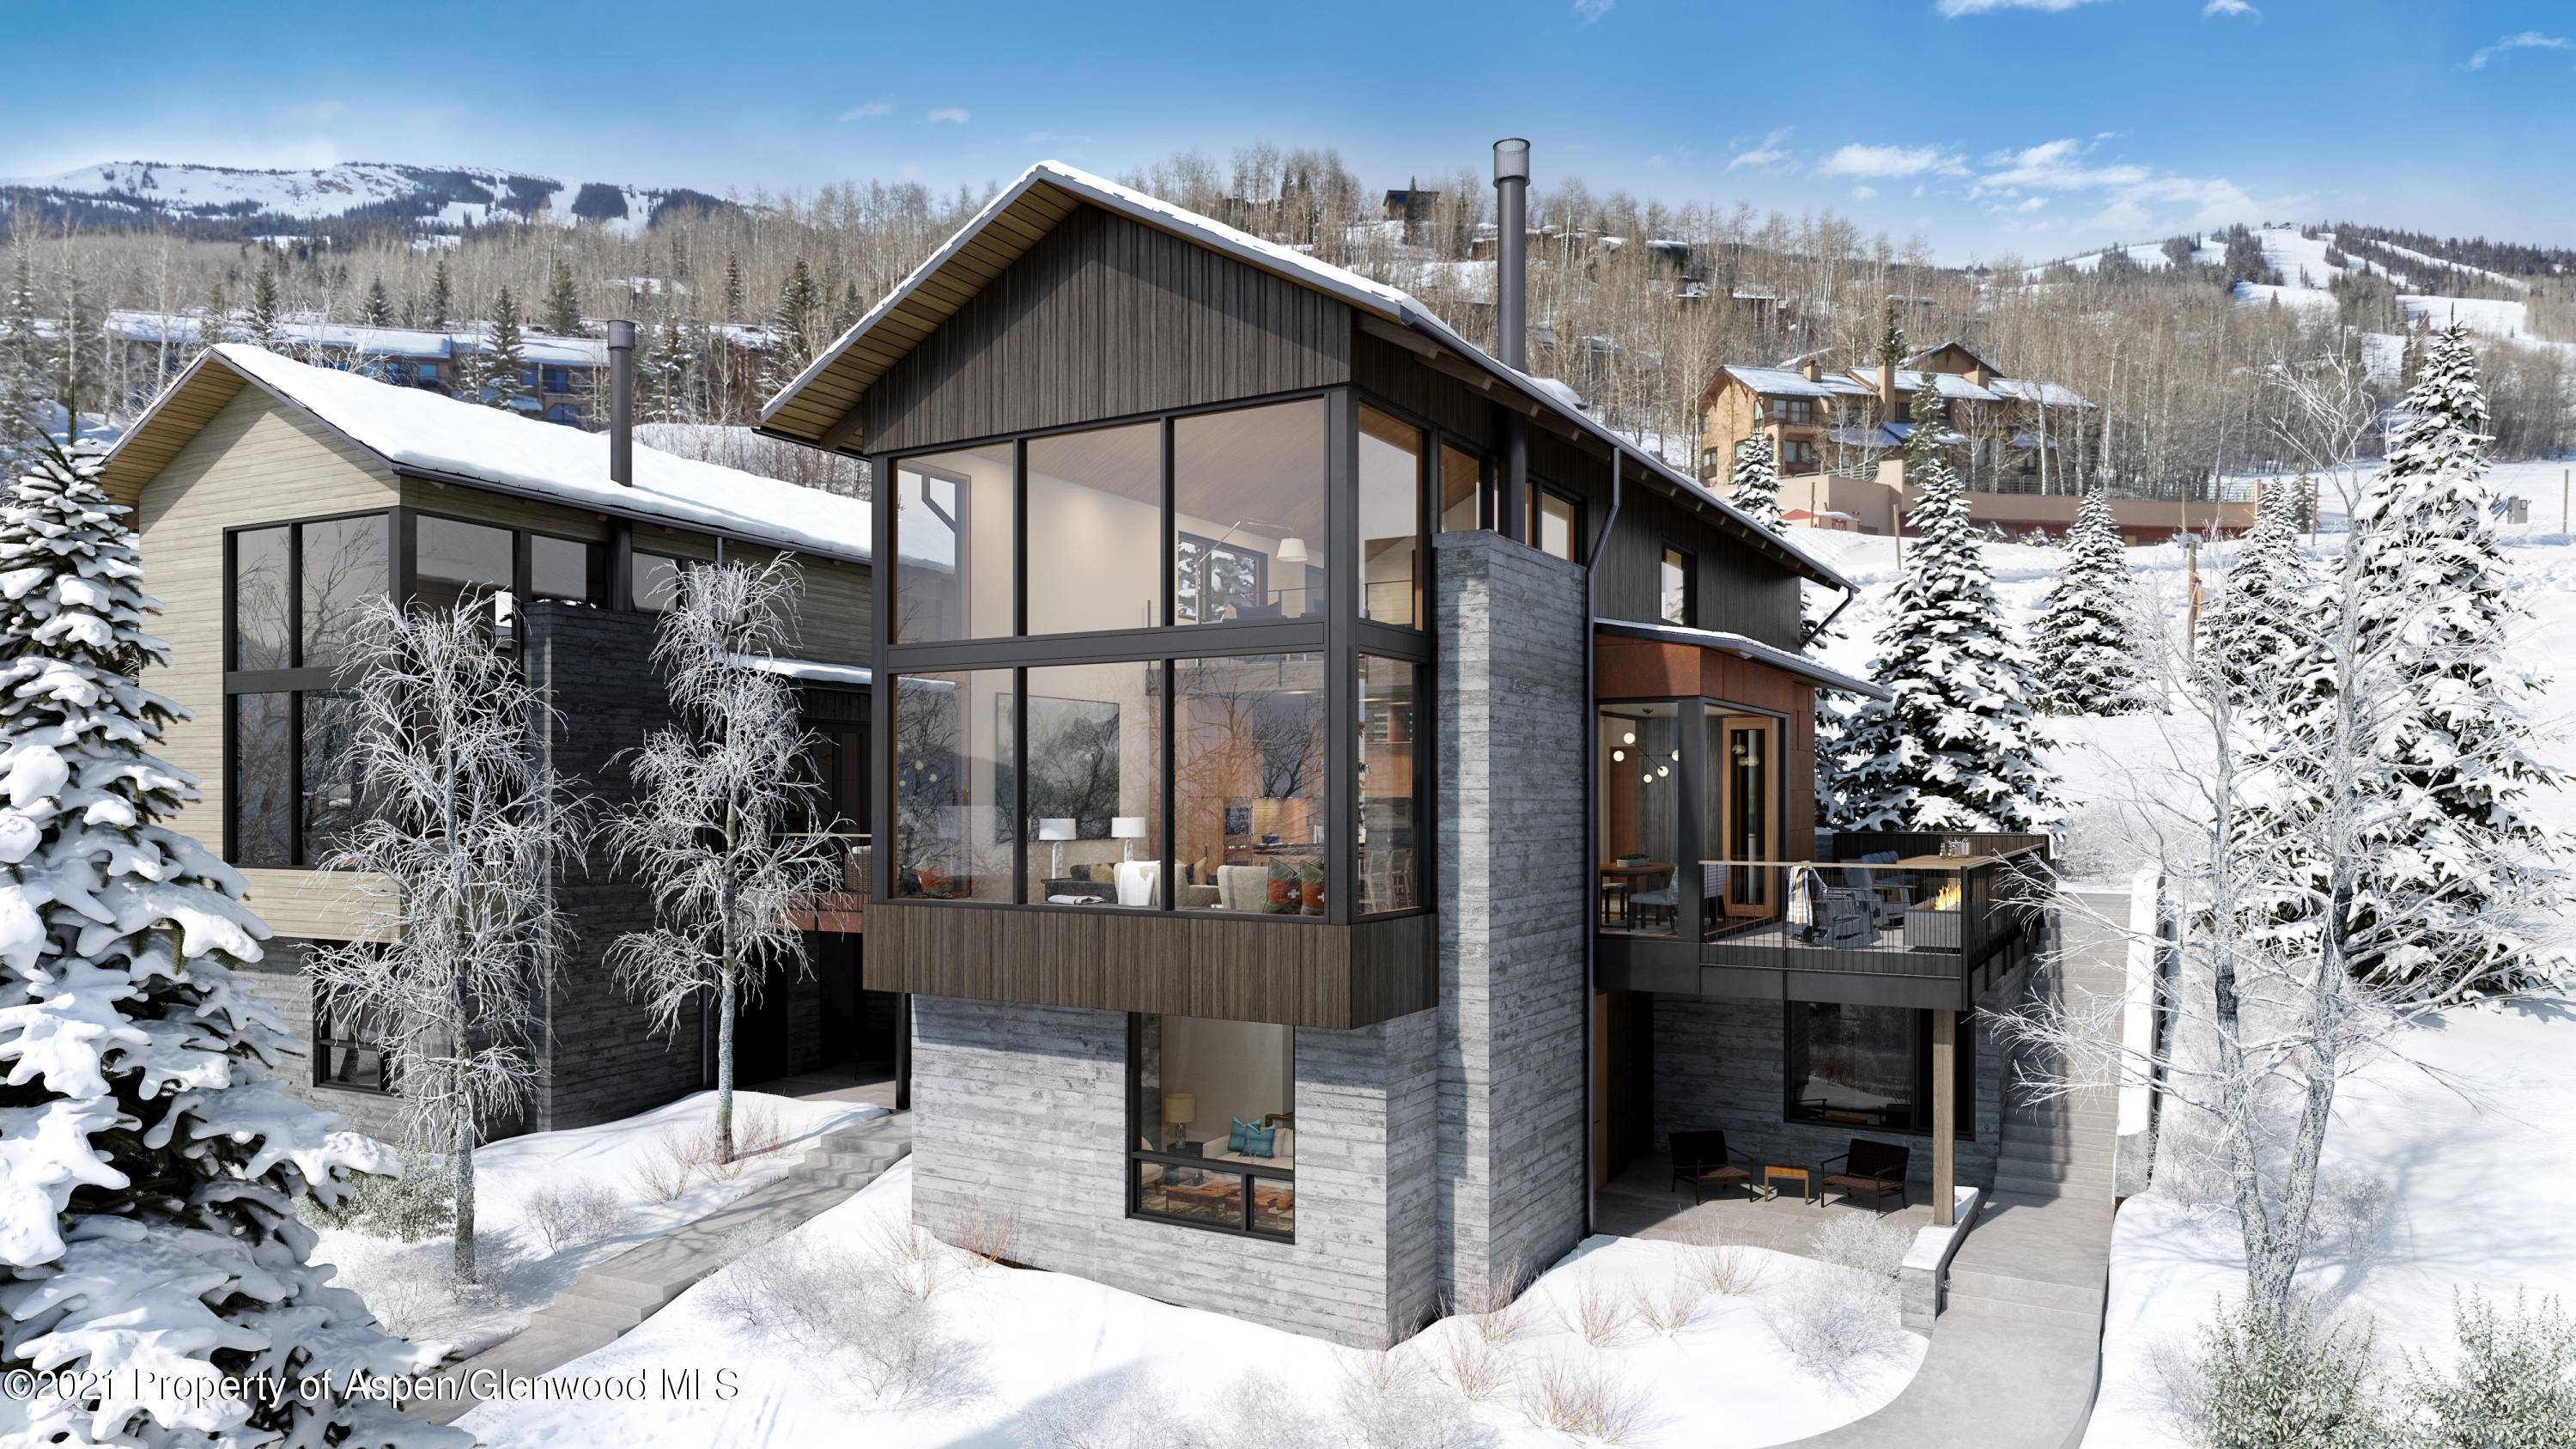 This 'Penthouse of Havens' is a spacious 4 bedroom home locatedin the upper row of the community, right on the Fanny Hill ski run, next to The Overlook.